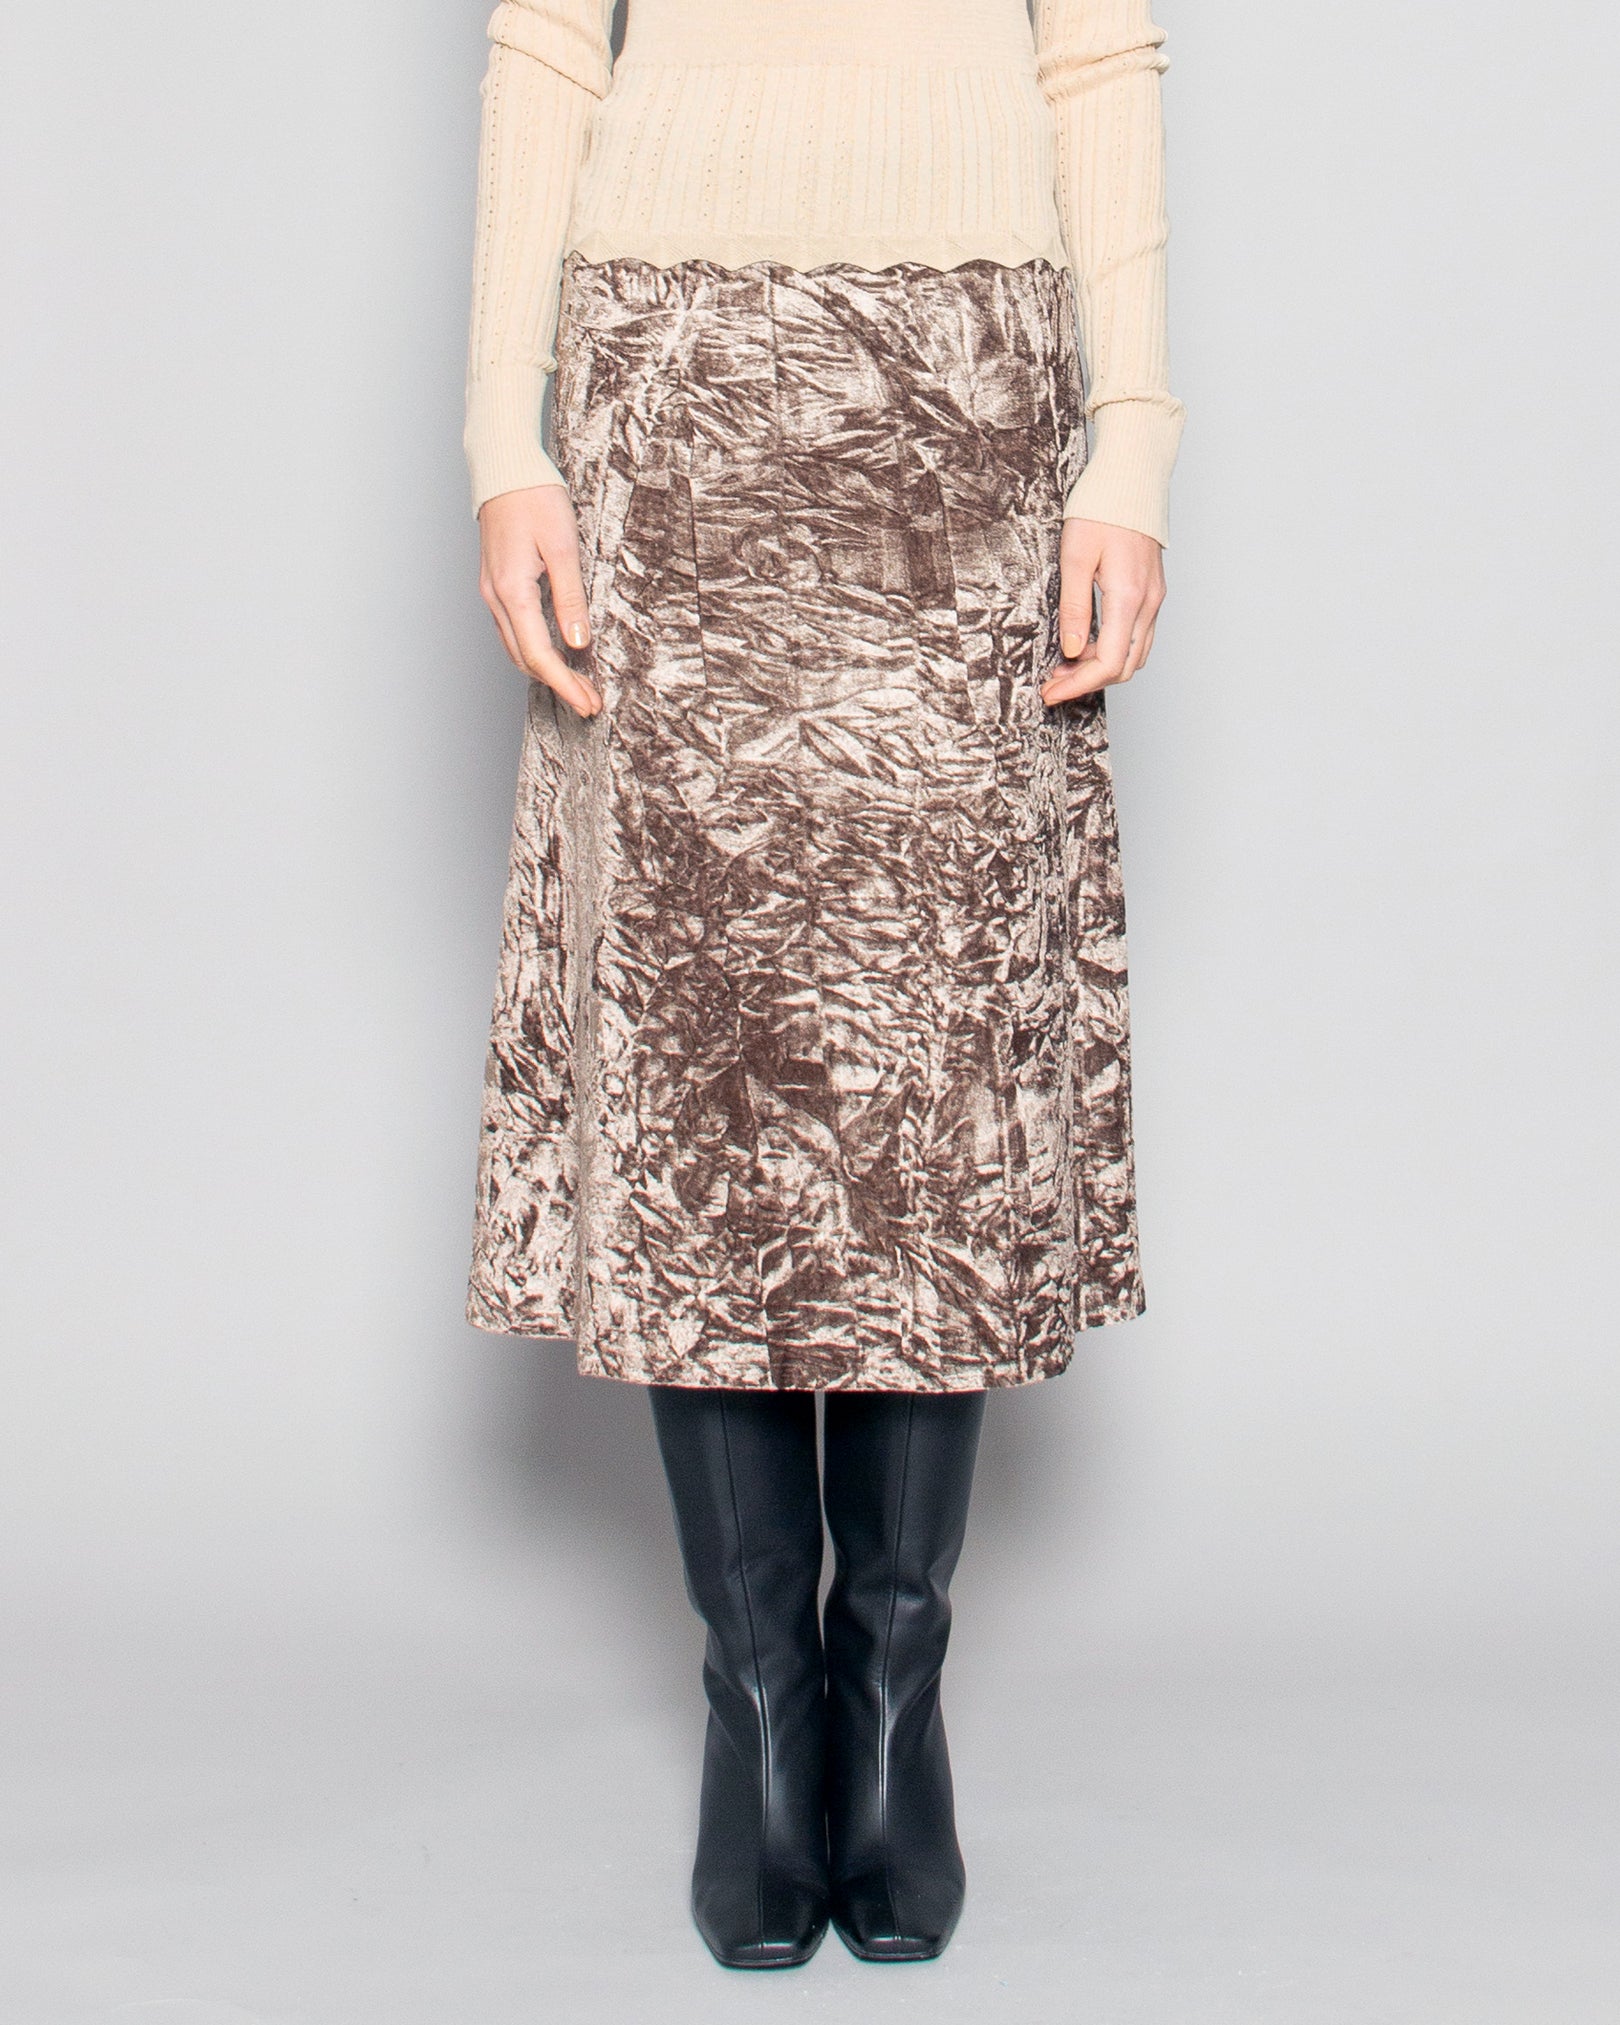 PERSONS Kit Crushed Velvet Midi Skirt in Cocoa available at Lahn.shop